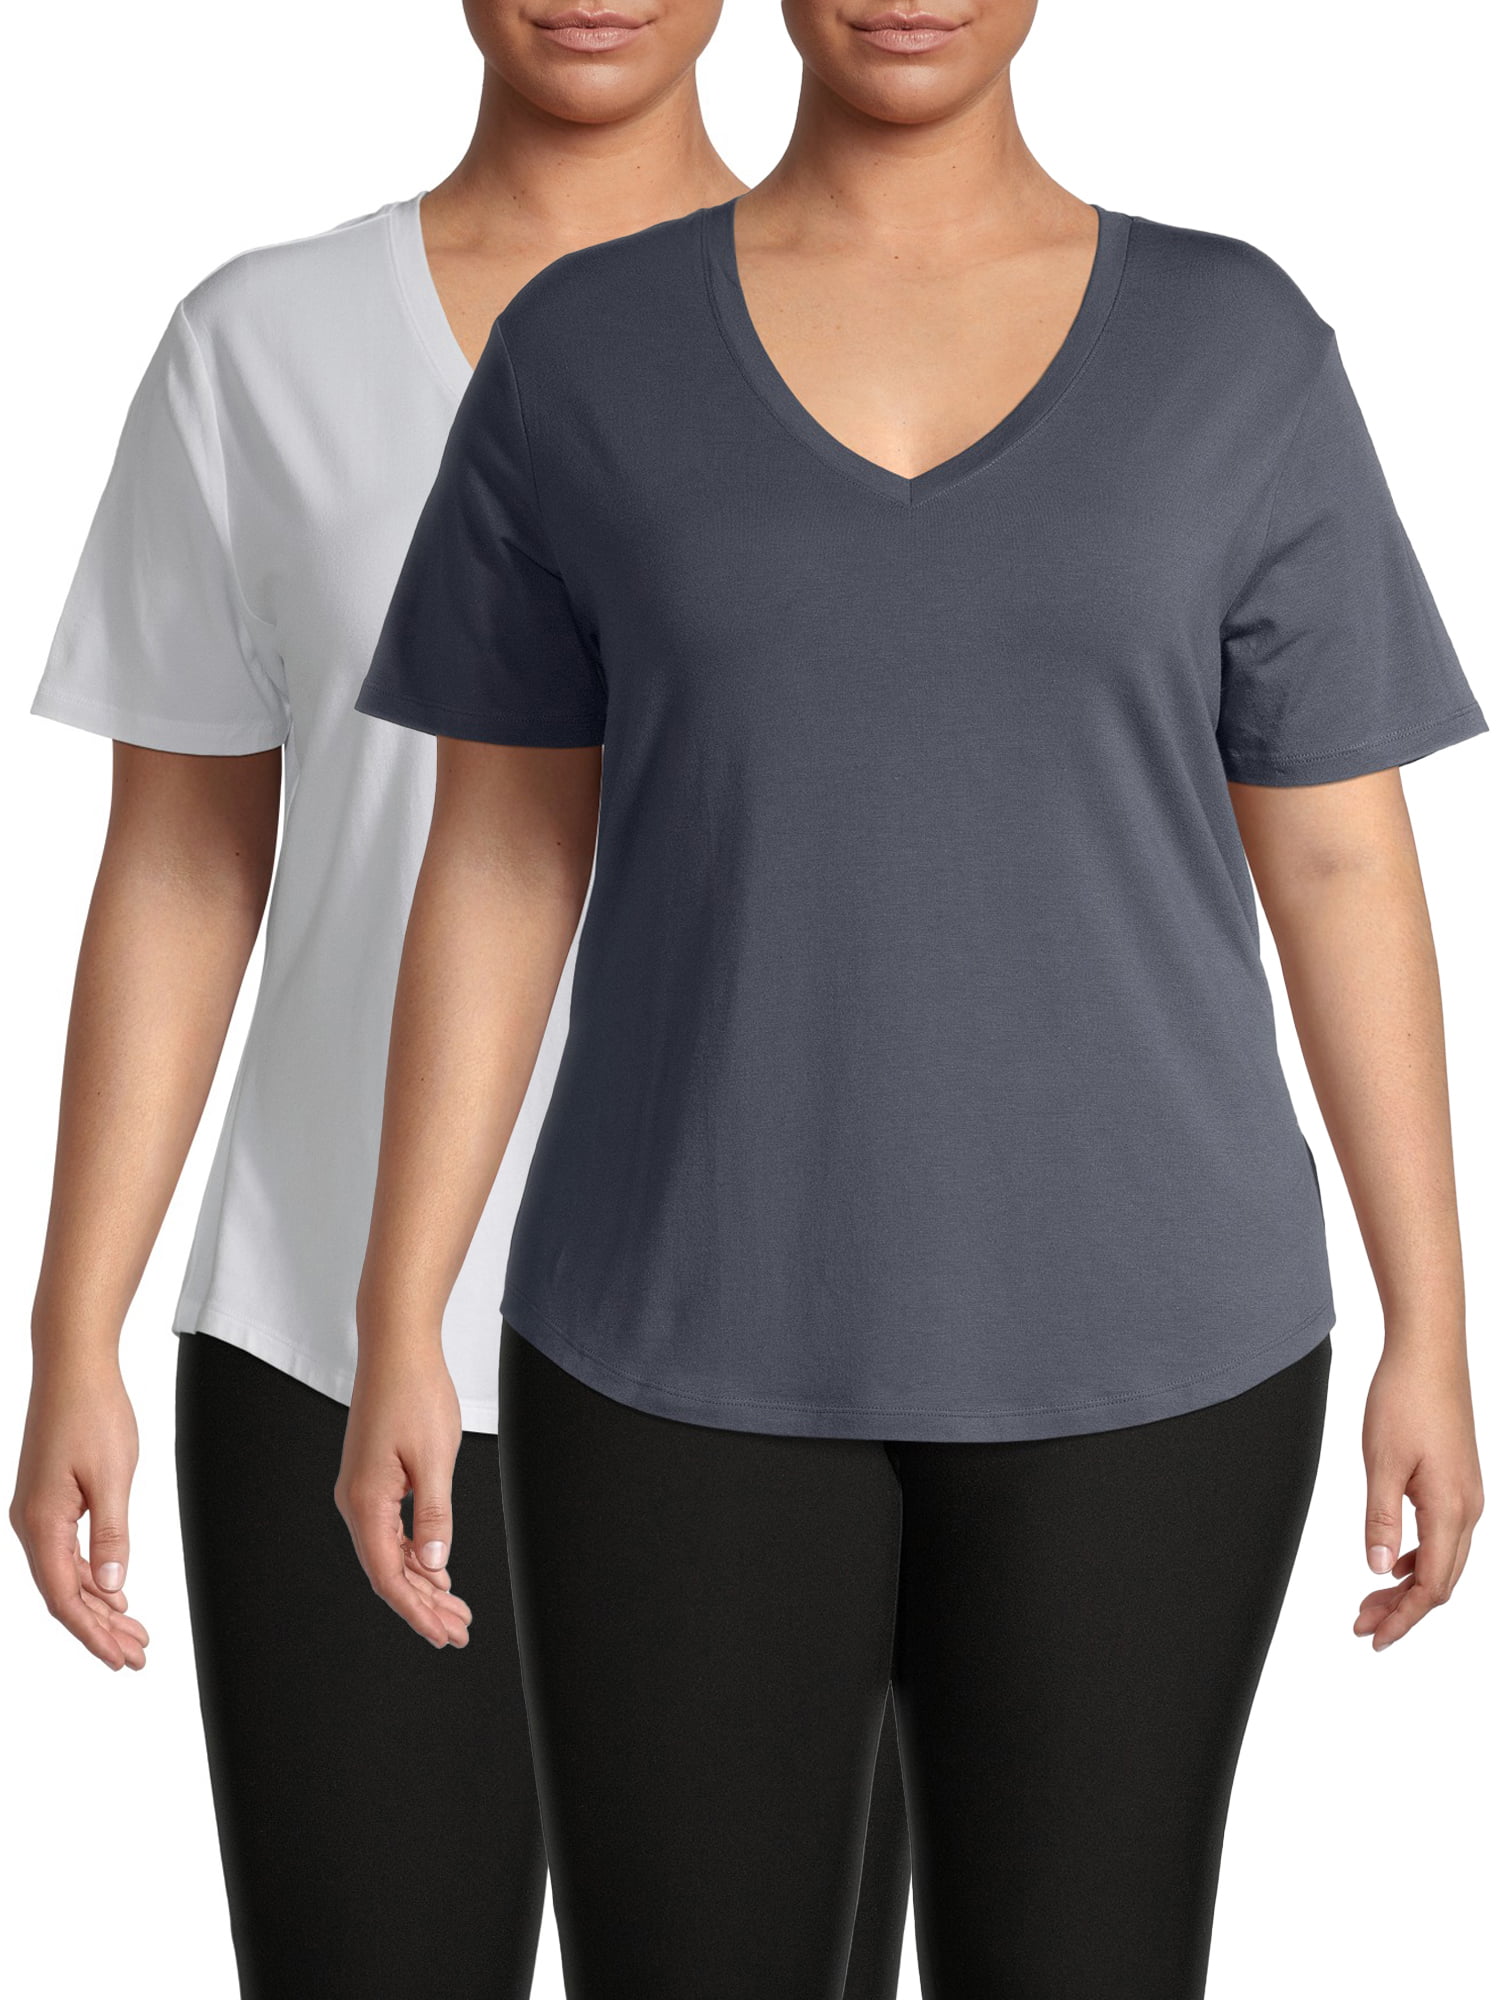 Women's relaxed softest and most comfortable t-shirt you'll ever own. –  Twowordstshirts